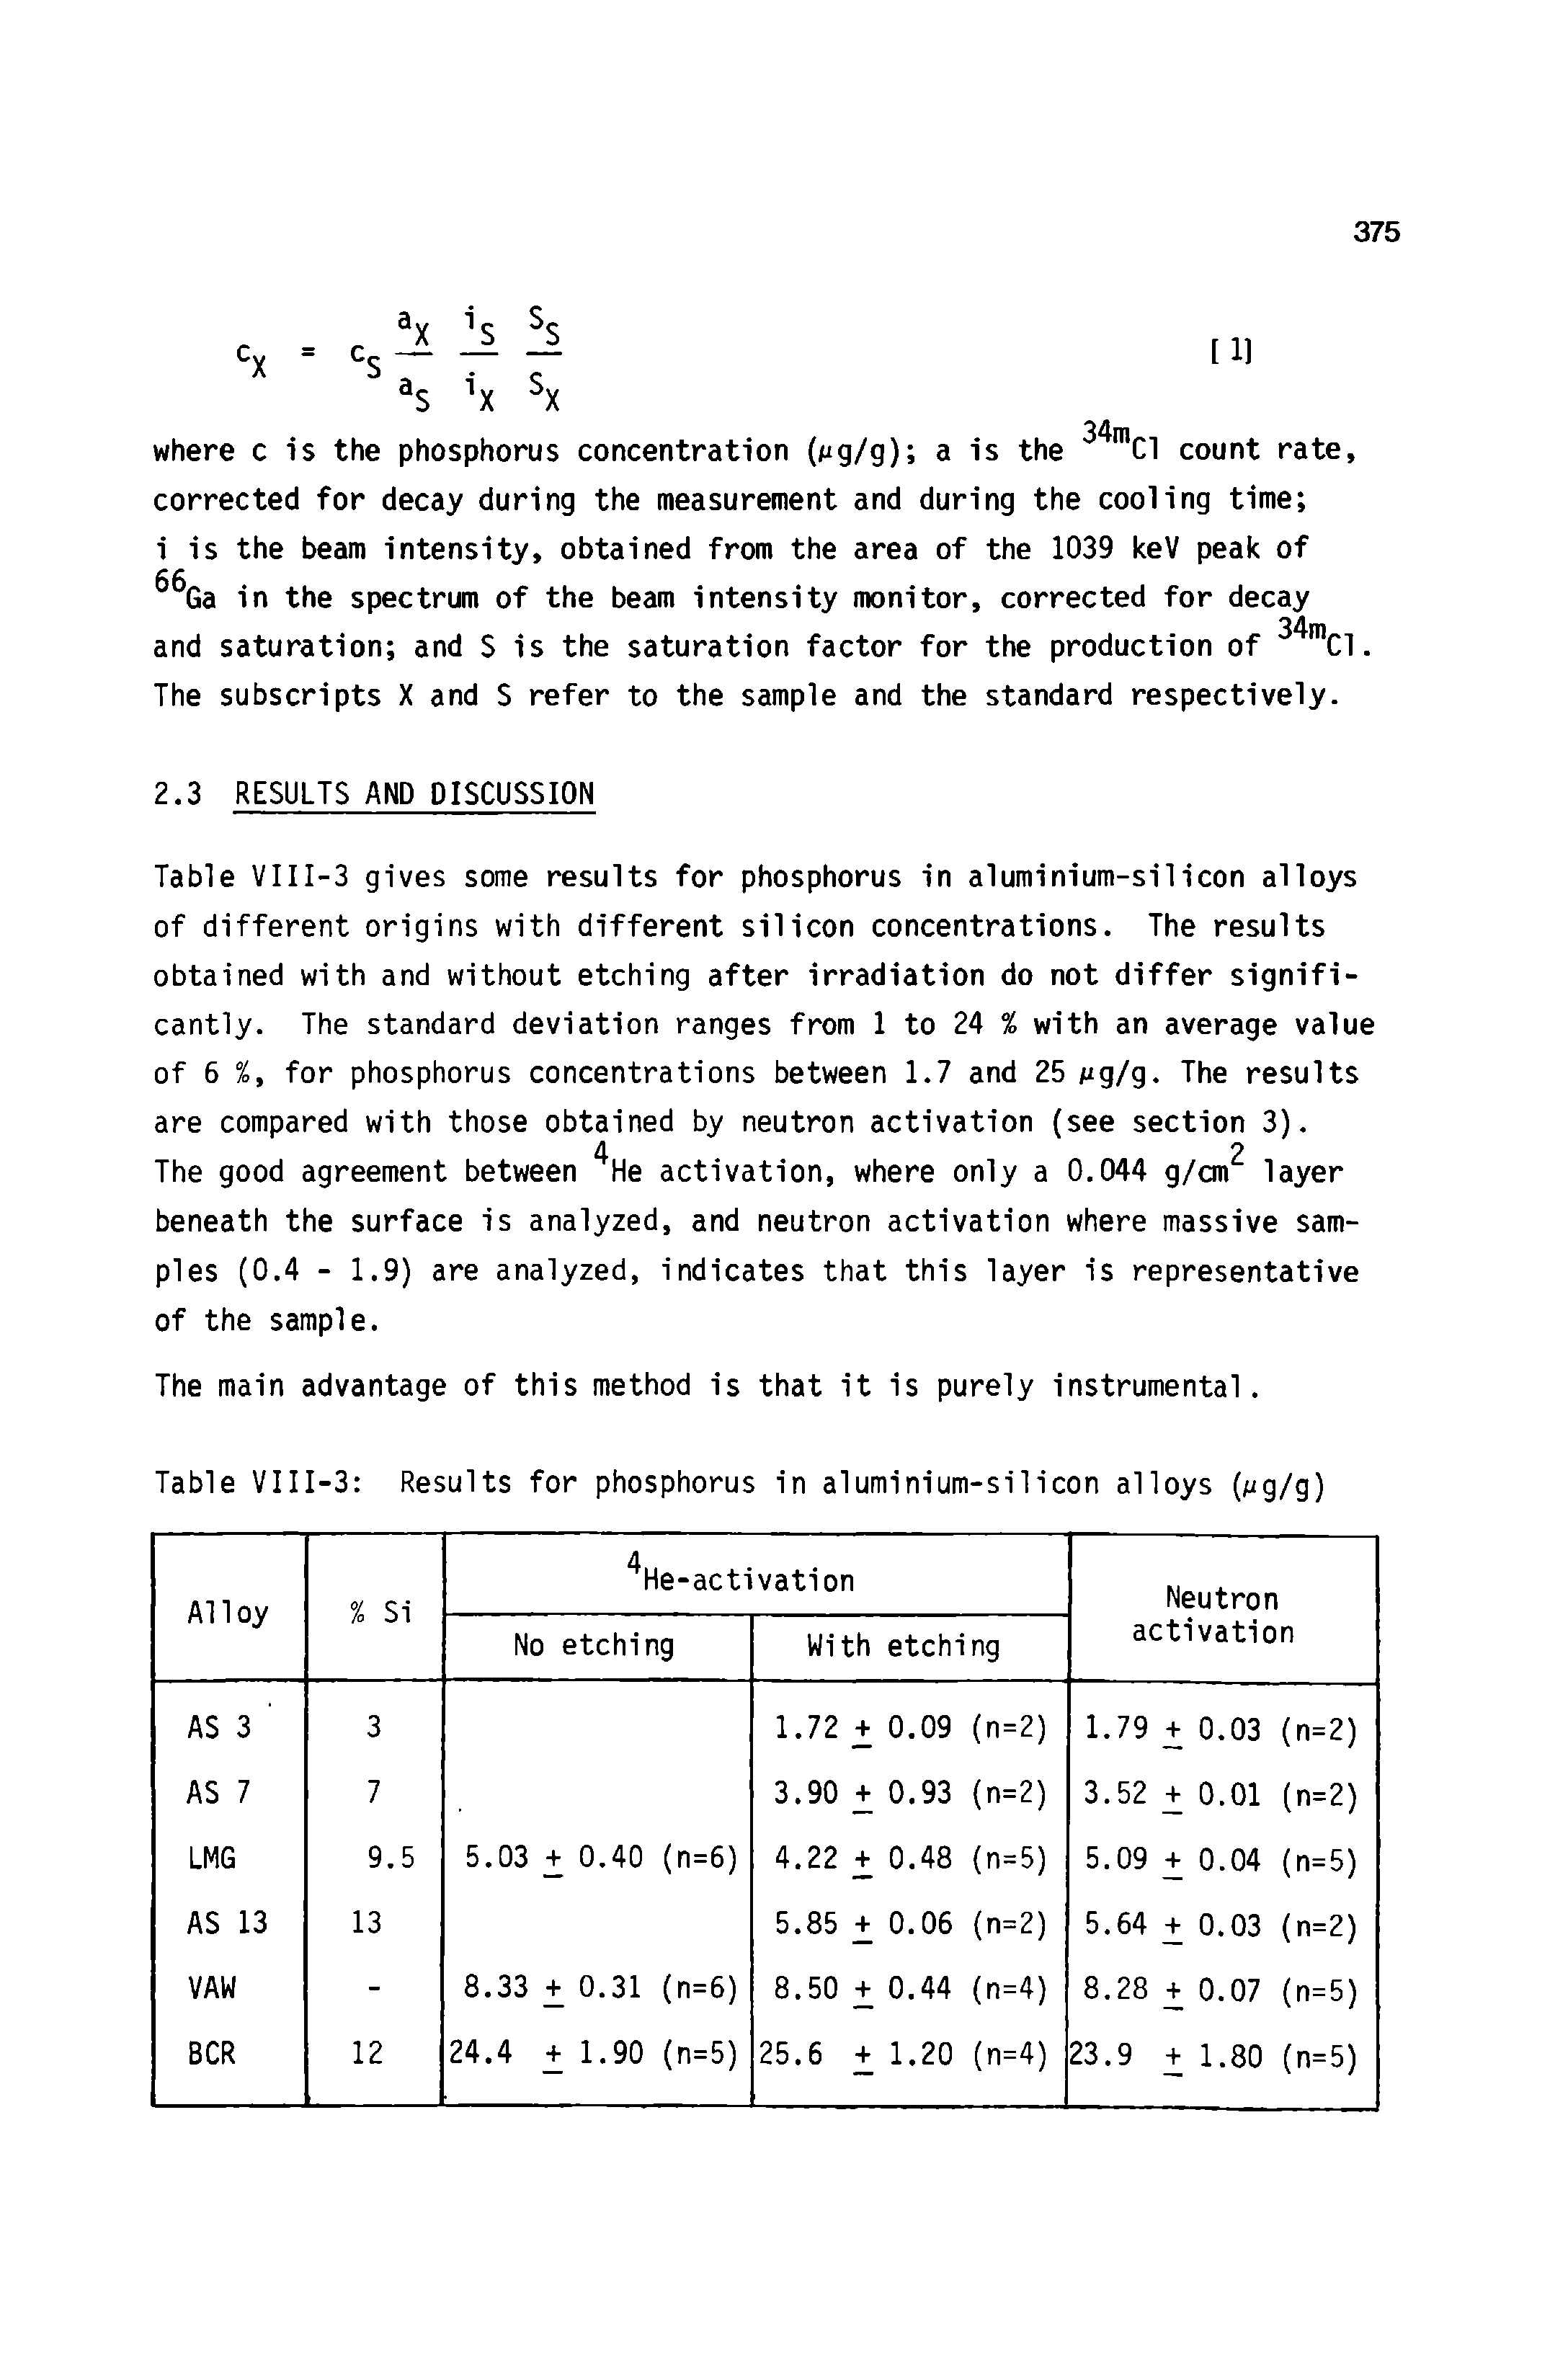 Table VIII-3 gives some results for phosphorus in aluminium-silicon alloys of different origins with different silicon concentrations. The results obtained with and without etching after irradiation do not differ significantly. The standard deviation ranges from 1 to 24 % with an average value of 6 %, for phosphorus concentrations between 1.7 and 25 g/g. The results...